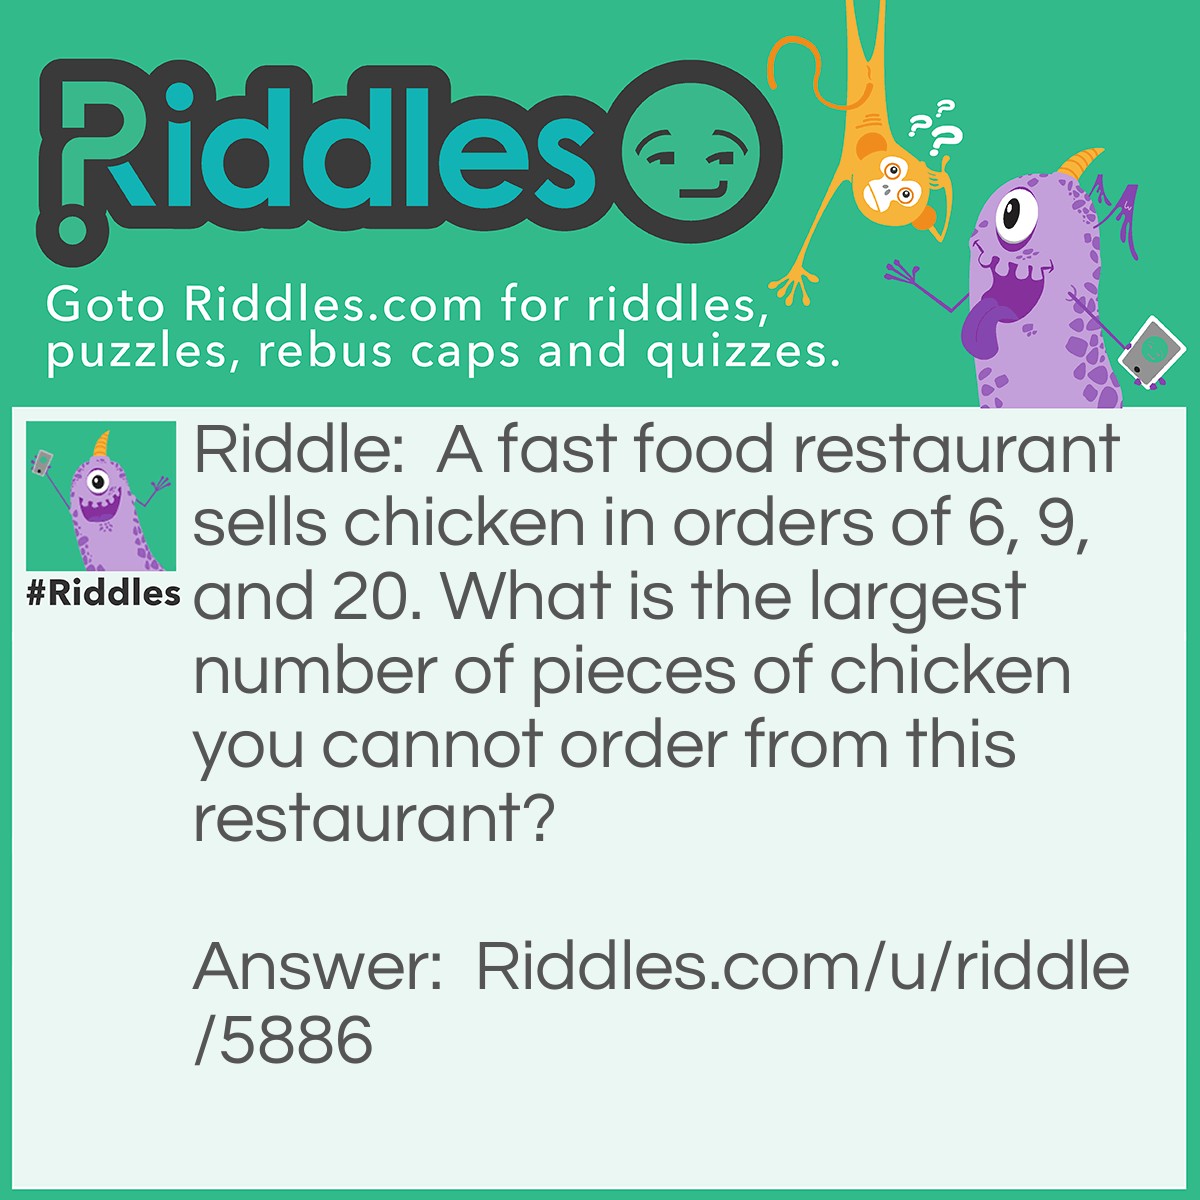 Riddle: A fast food restaurant sells chicken in orders of 6, 9, and 20. What is the largest number of pieces of chicken you cannot order from this restaurant? Answer: 43. After 6 all numbers divisible by 3 can be ordered (because they can all be expressed as a sum of 6's and 9's). After 26, all numbers divisible by three when subtracted by 20 can be obtained. After 46, all numbers divisible by three when subtracted by 40 can be obtained. After 46, all numbers fit into one of these 3 categories, so all numbers can be obtained. 43 is the last number that doesn't fall into one of these categories (44 = 20 + 6 * 4, 45 = 6 * 6 + 9).